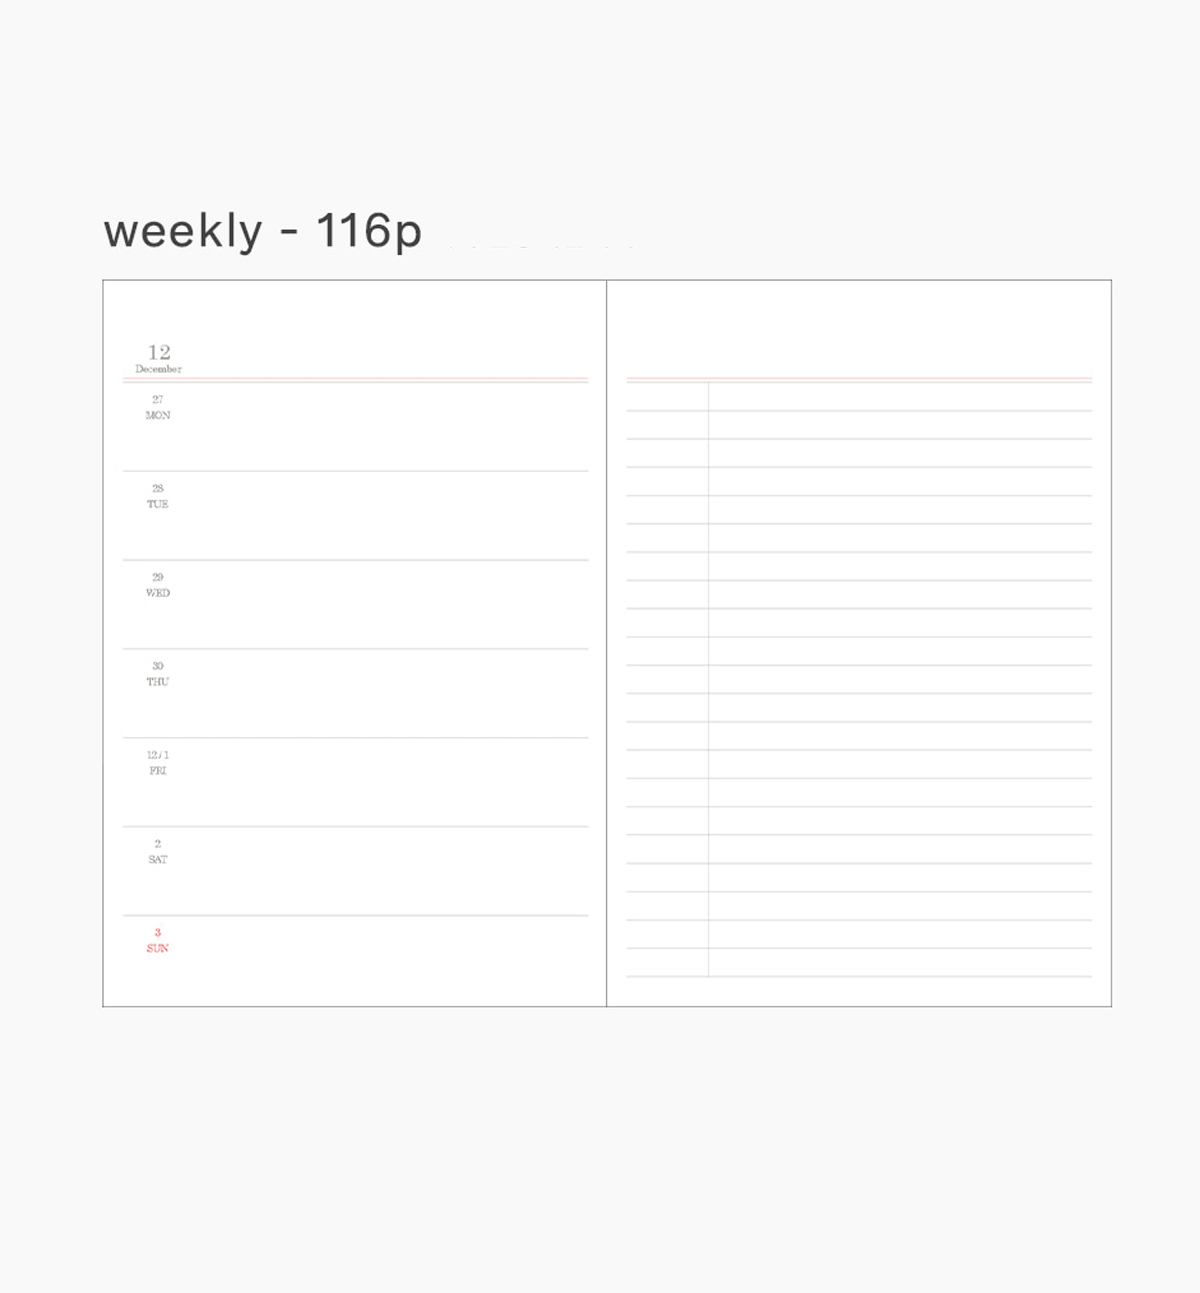 2024 Moment Weekly Planner